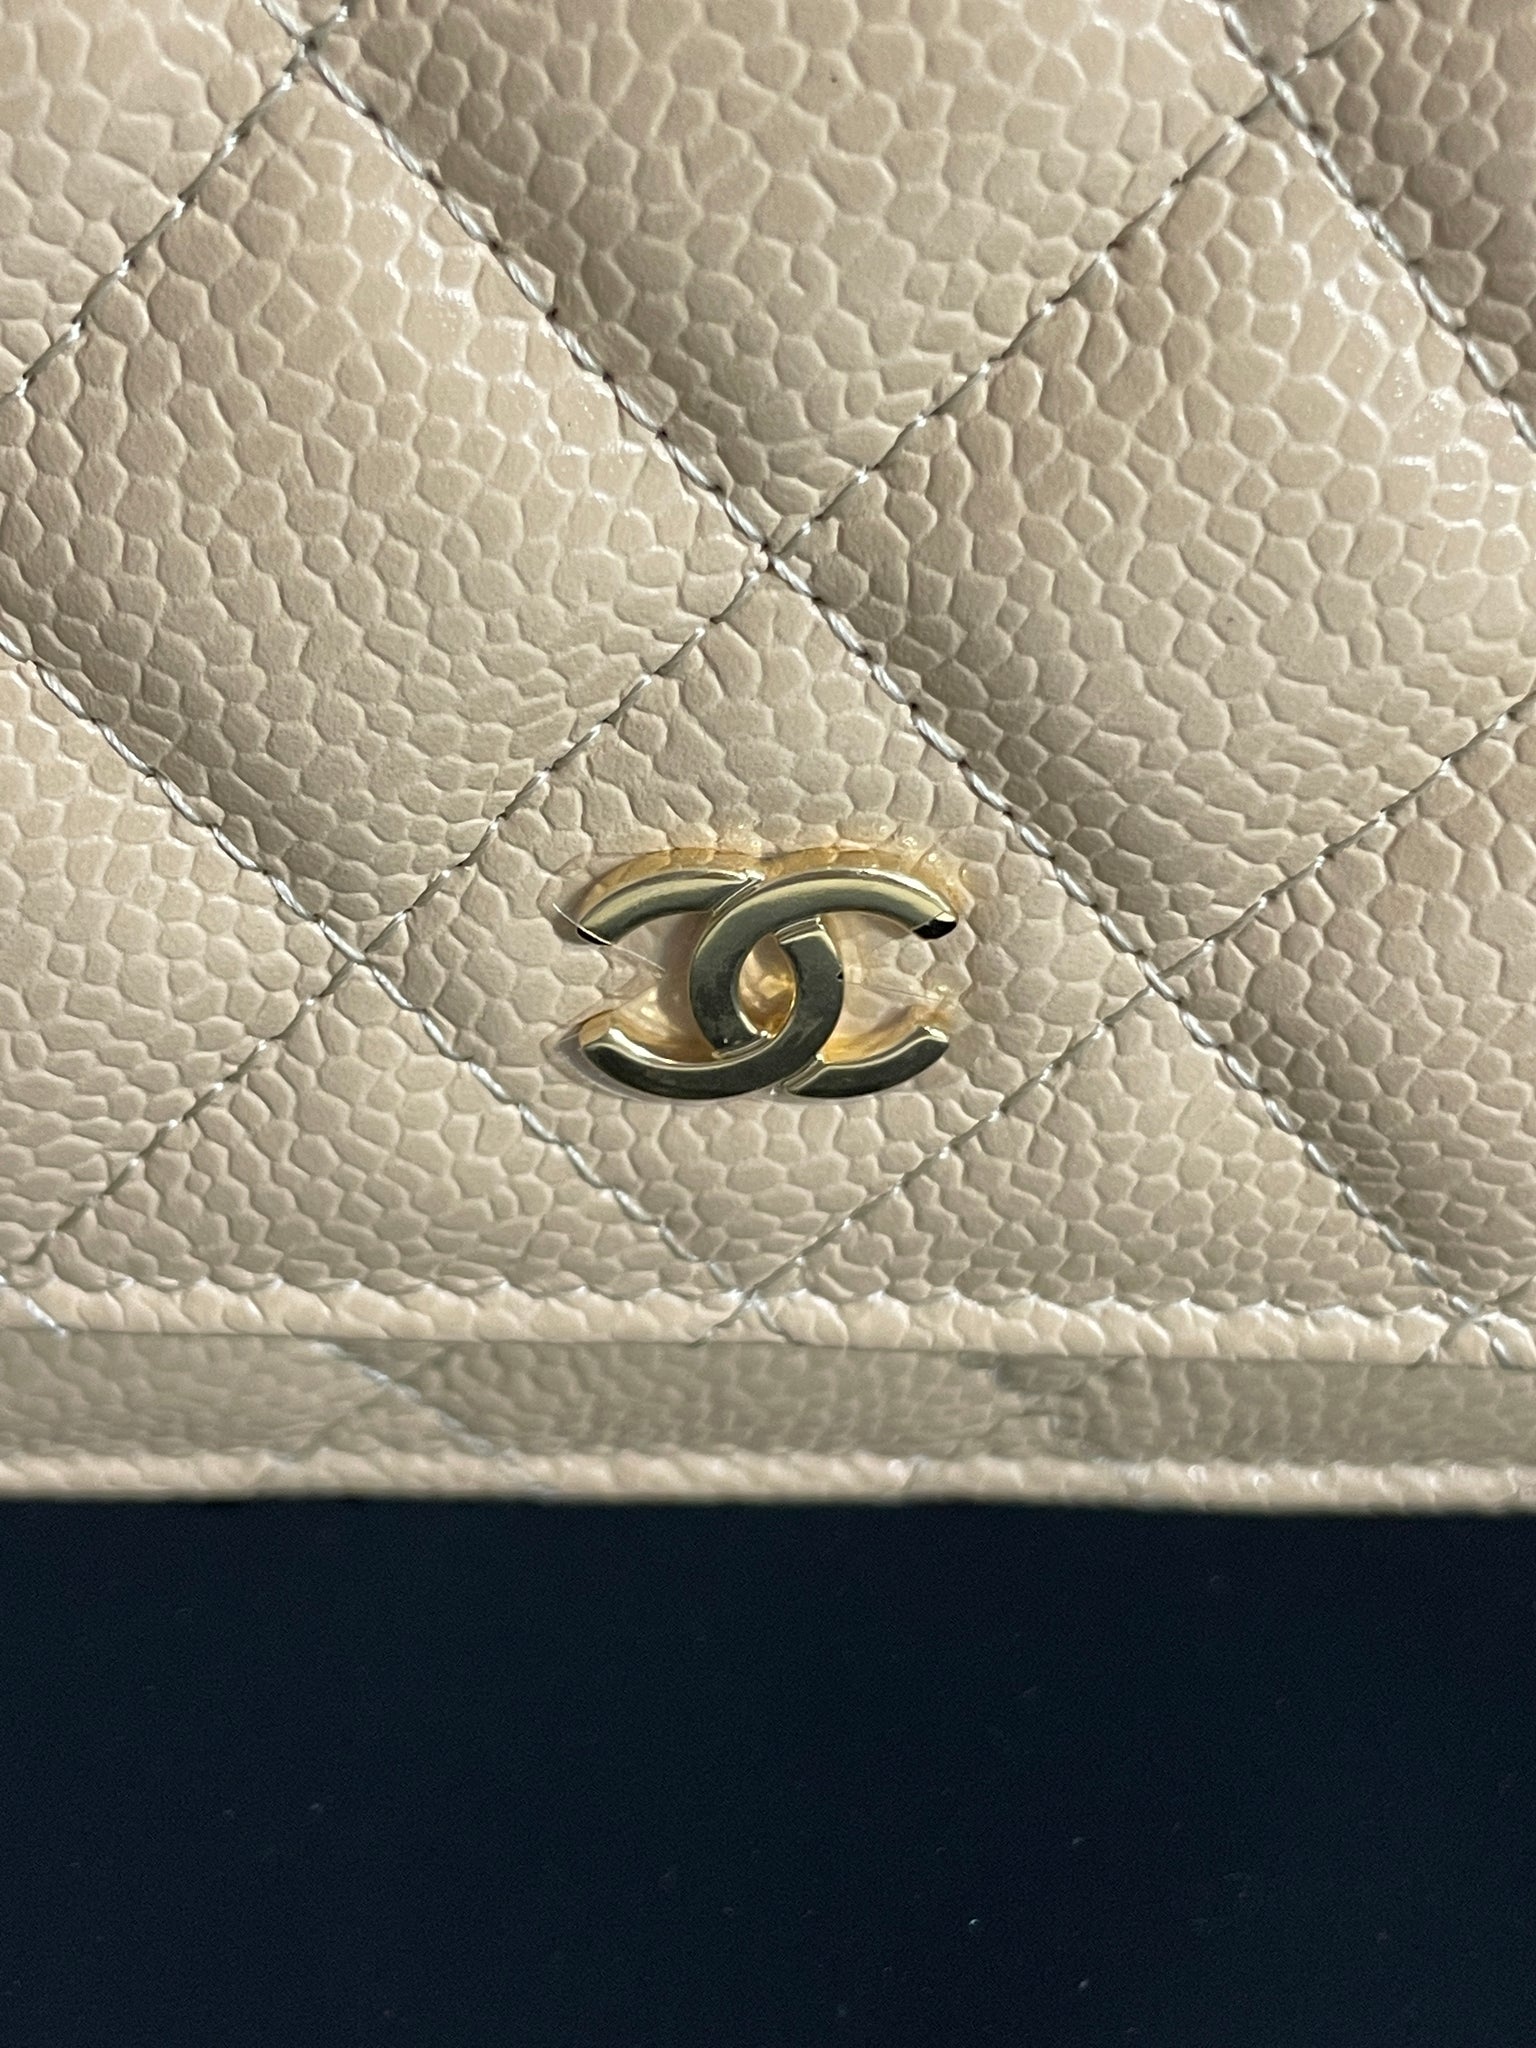 Chanel Nude Beige Caviar Leather Wallet on Chain Flap Crossbody WOC 861270  at 1stDibs